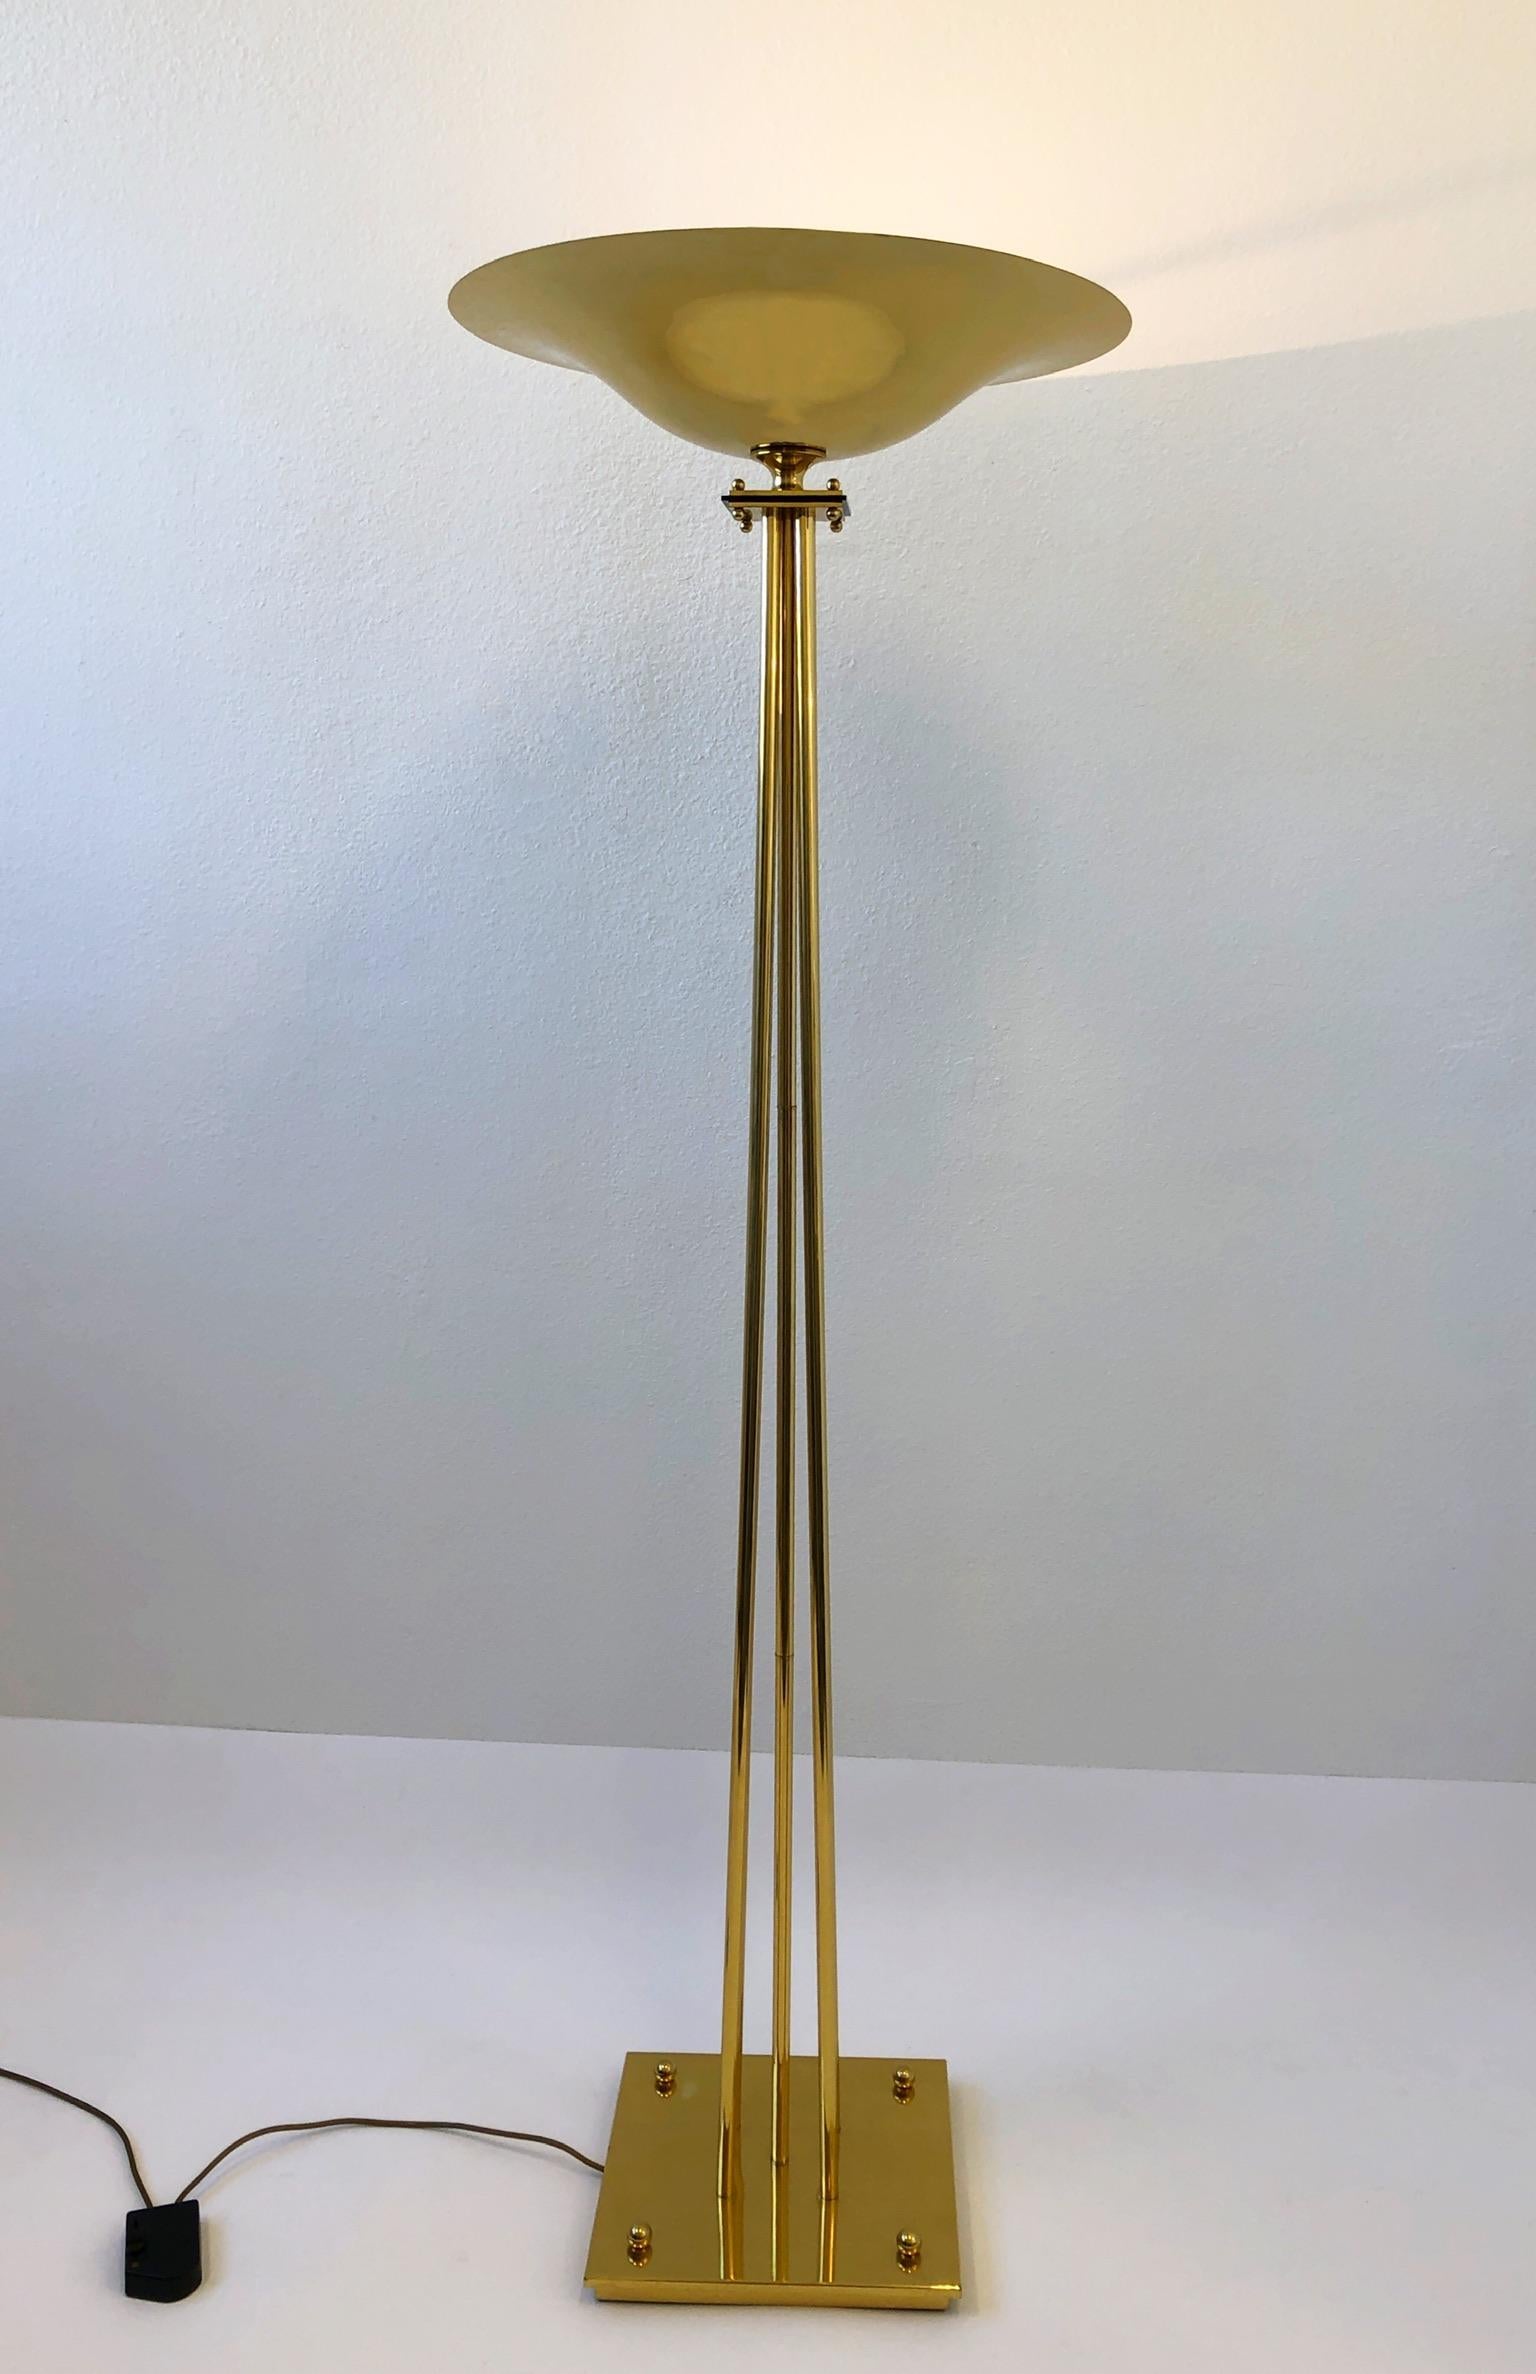 Large Italian polish brass torchier floor lamp, design by Prearo in the 1980s.
It takes a 300w halogen bulb and it has a full range in line dimmer.
Marked Prearo and made in Italy on the bottom (see detail photos).
The lamp is in original